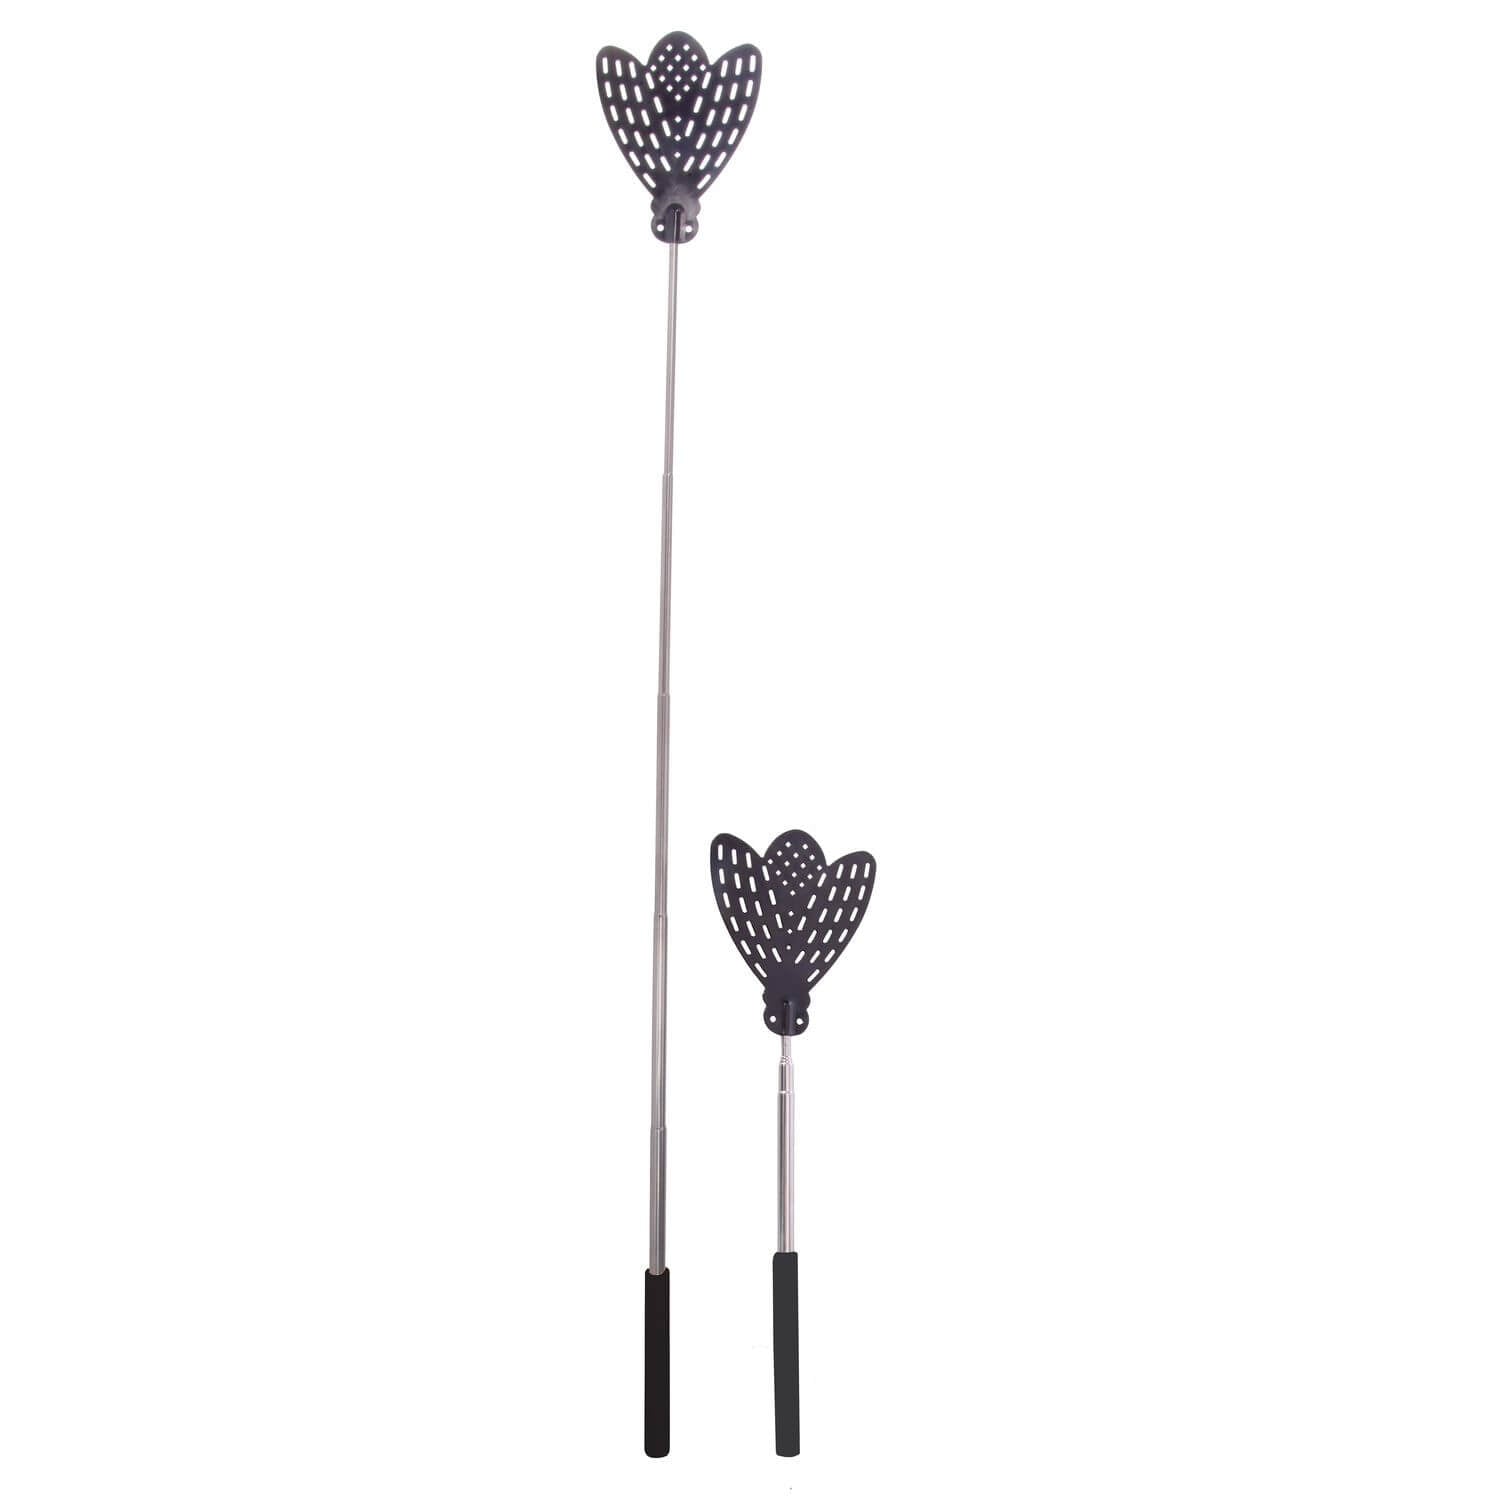 An extended Telescopic Fly Swatter and a non-extended swat side-by-side